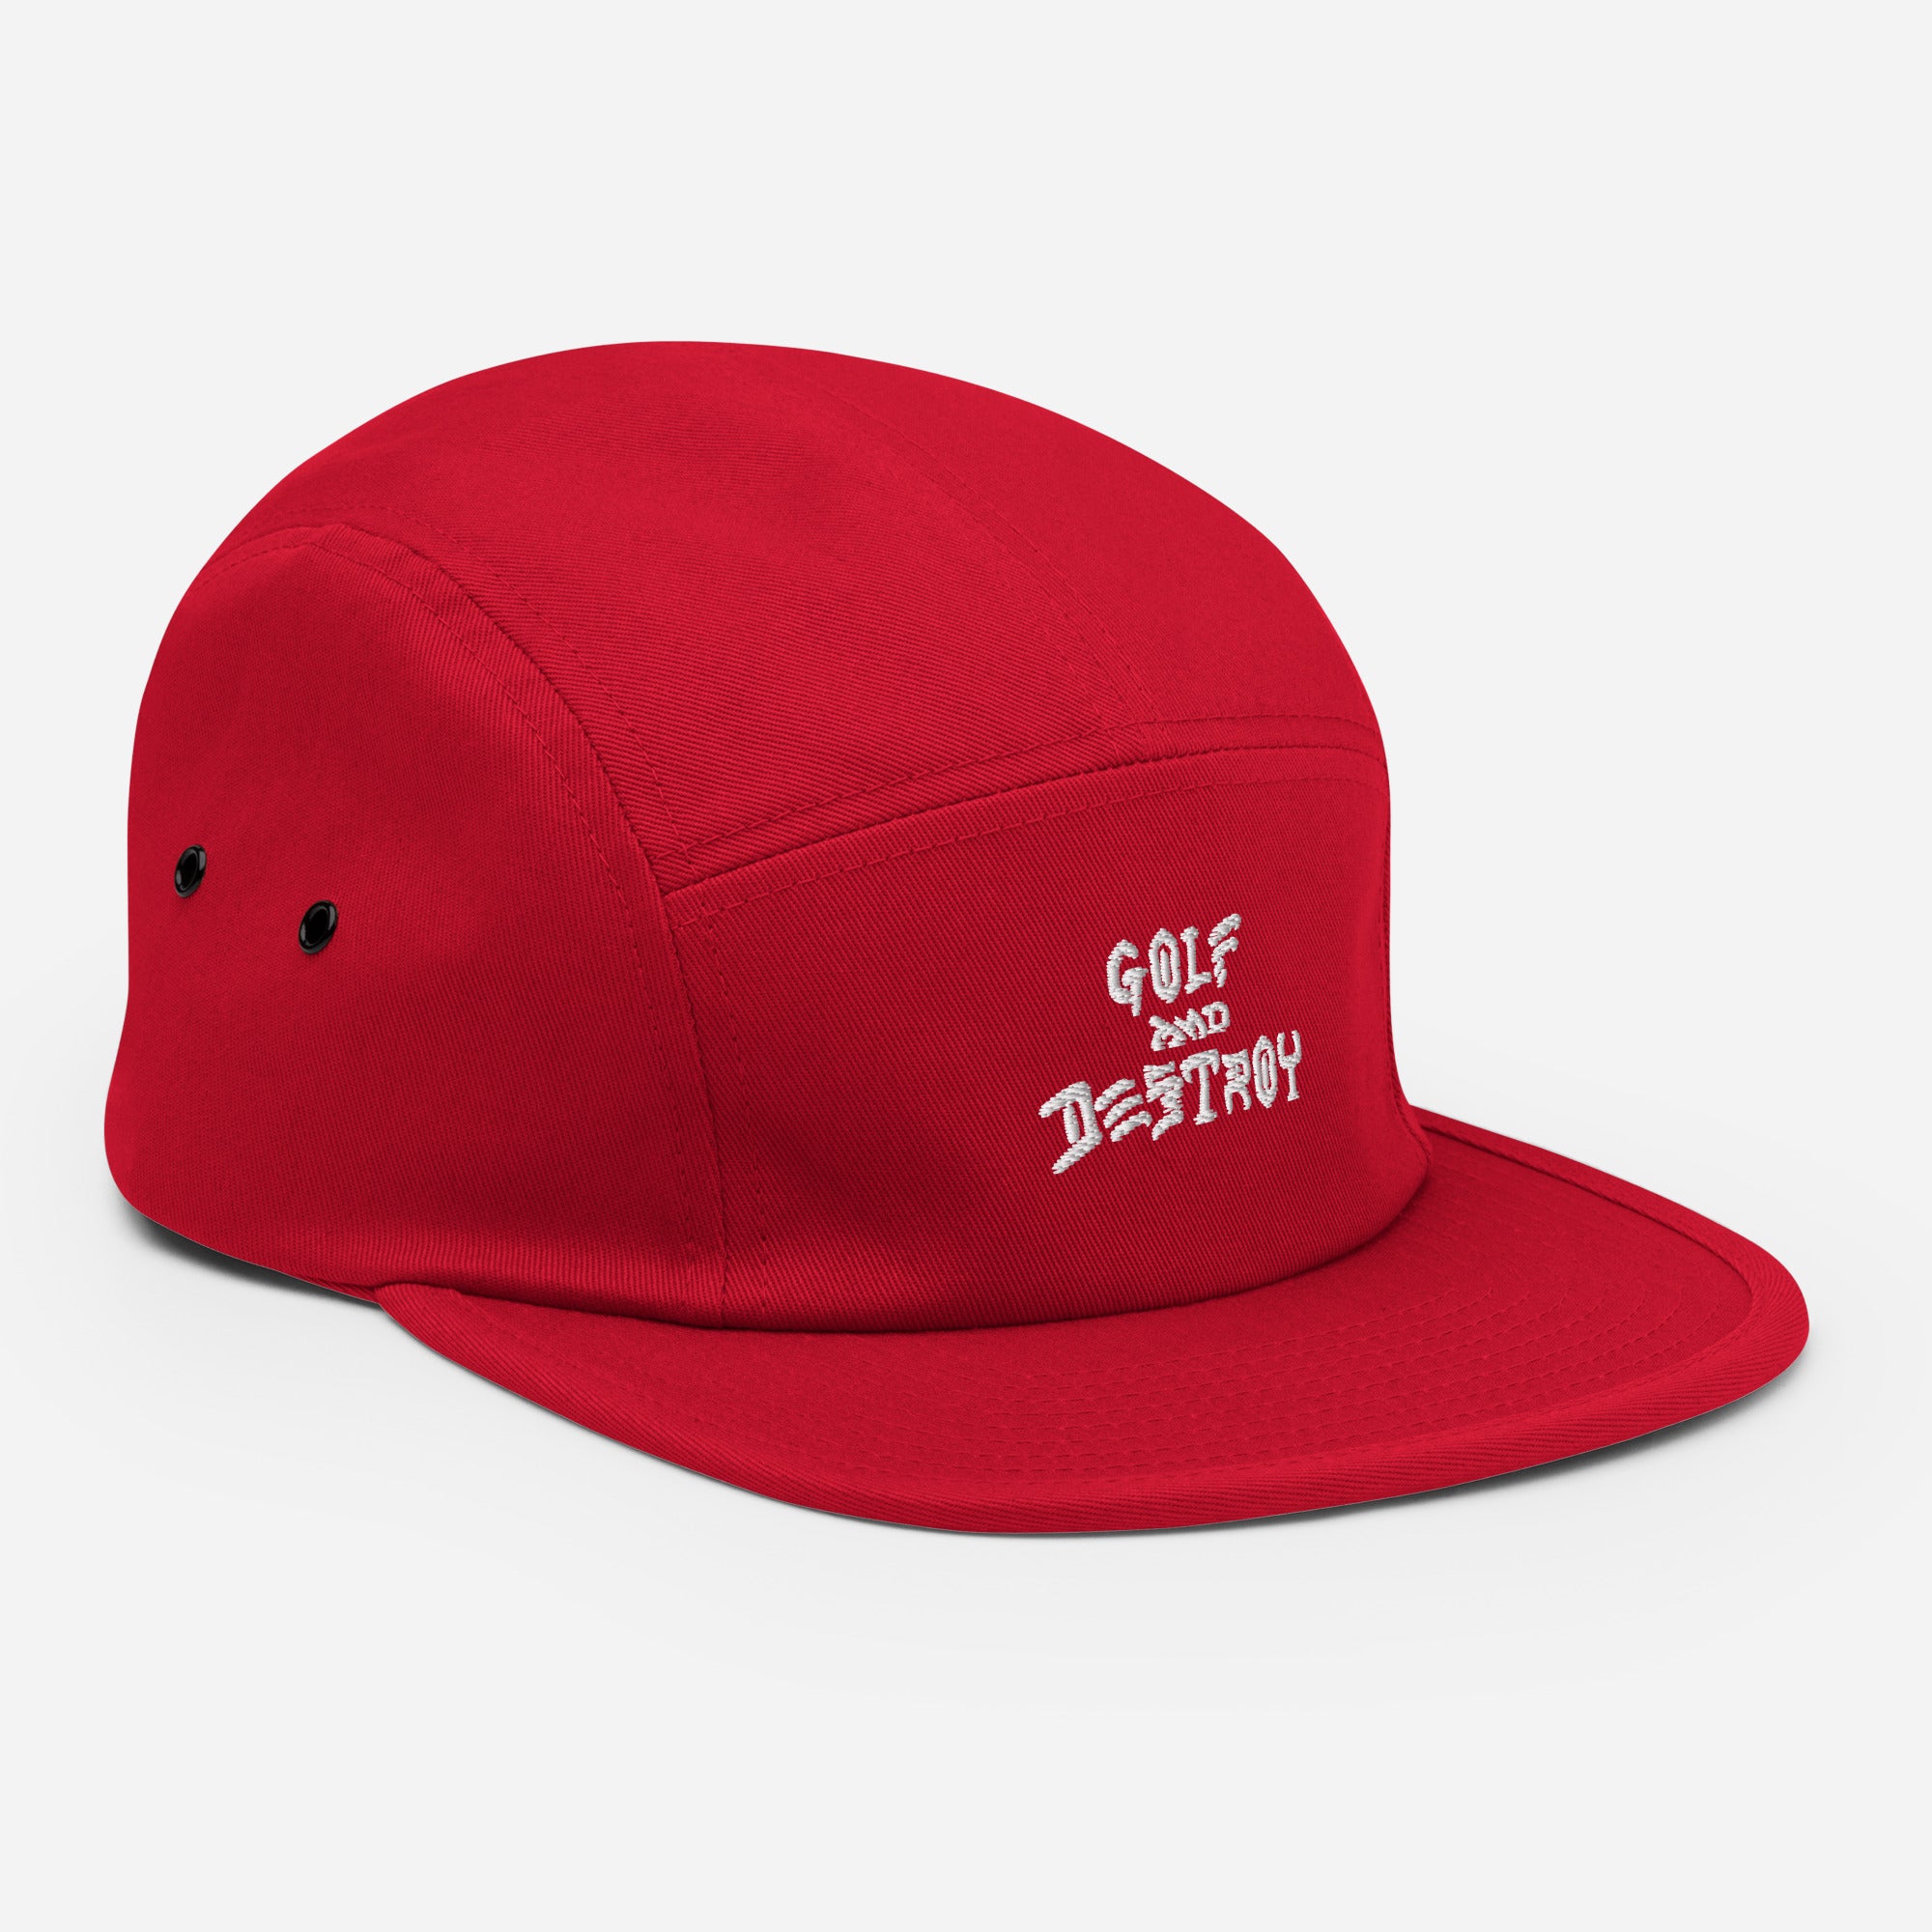 Golf and Destroy Embroided 5 panel